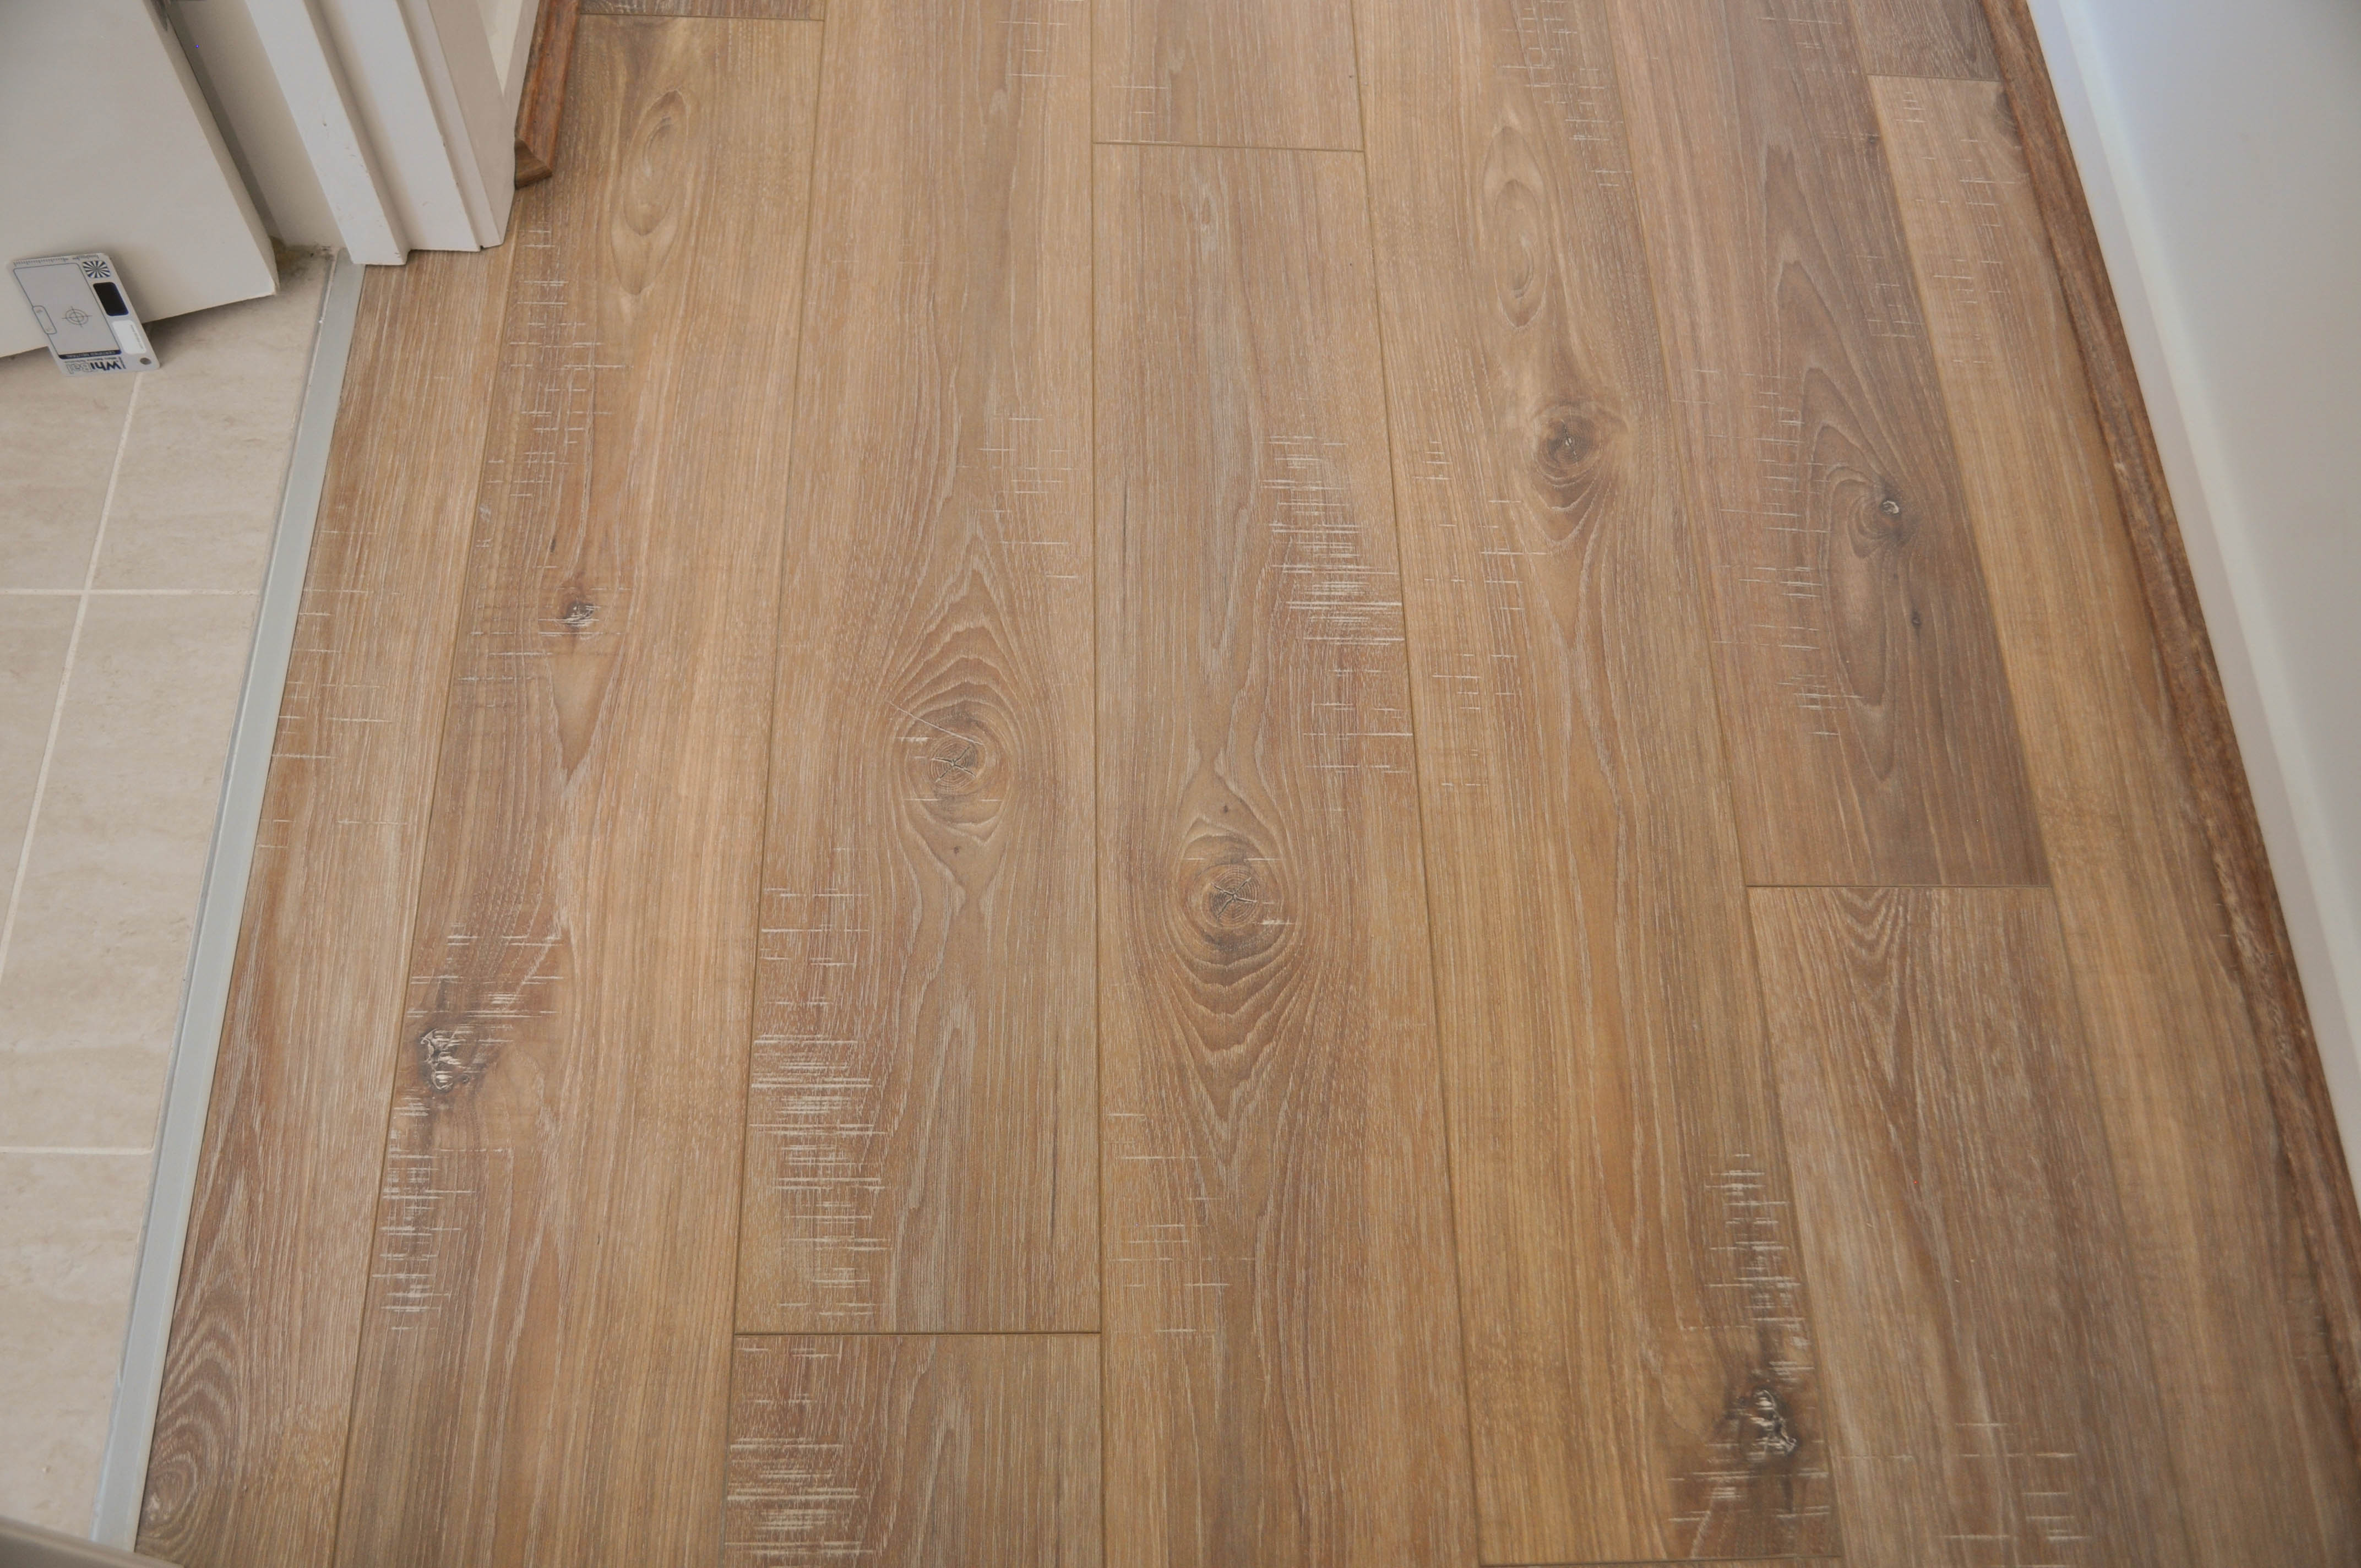 a photo of sample board of oak laminate flooring, 12mm thick laminate flooring  board, of a particular brand (aged oak)
 available to the public to buy Concord Floors and if they wish have it installed by Concord Floors.